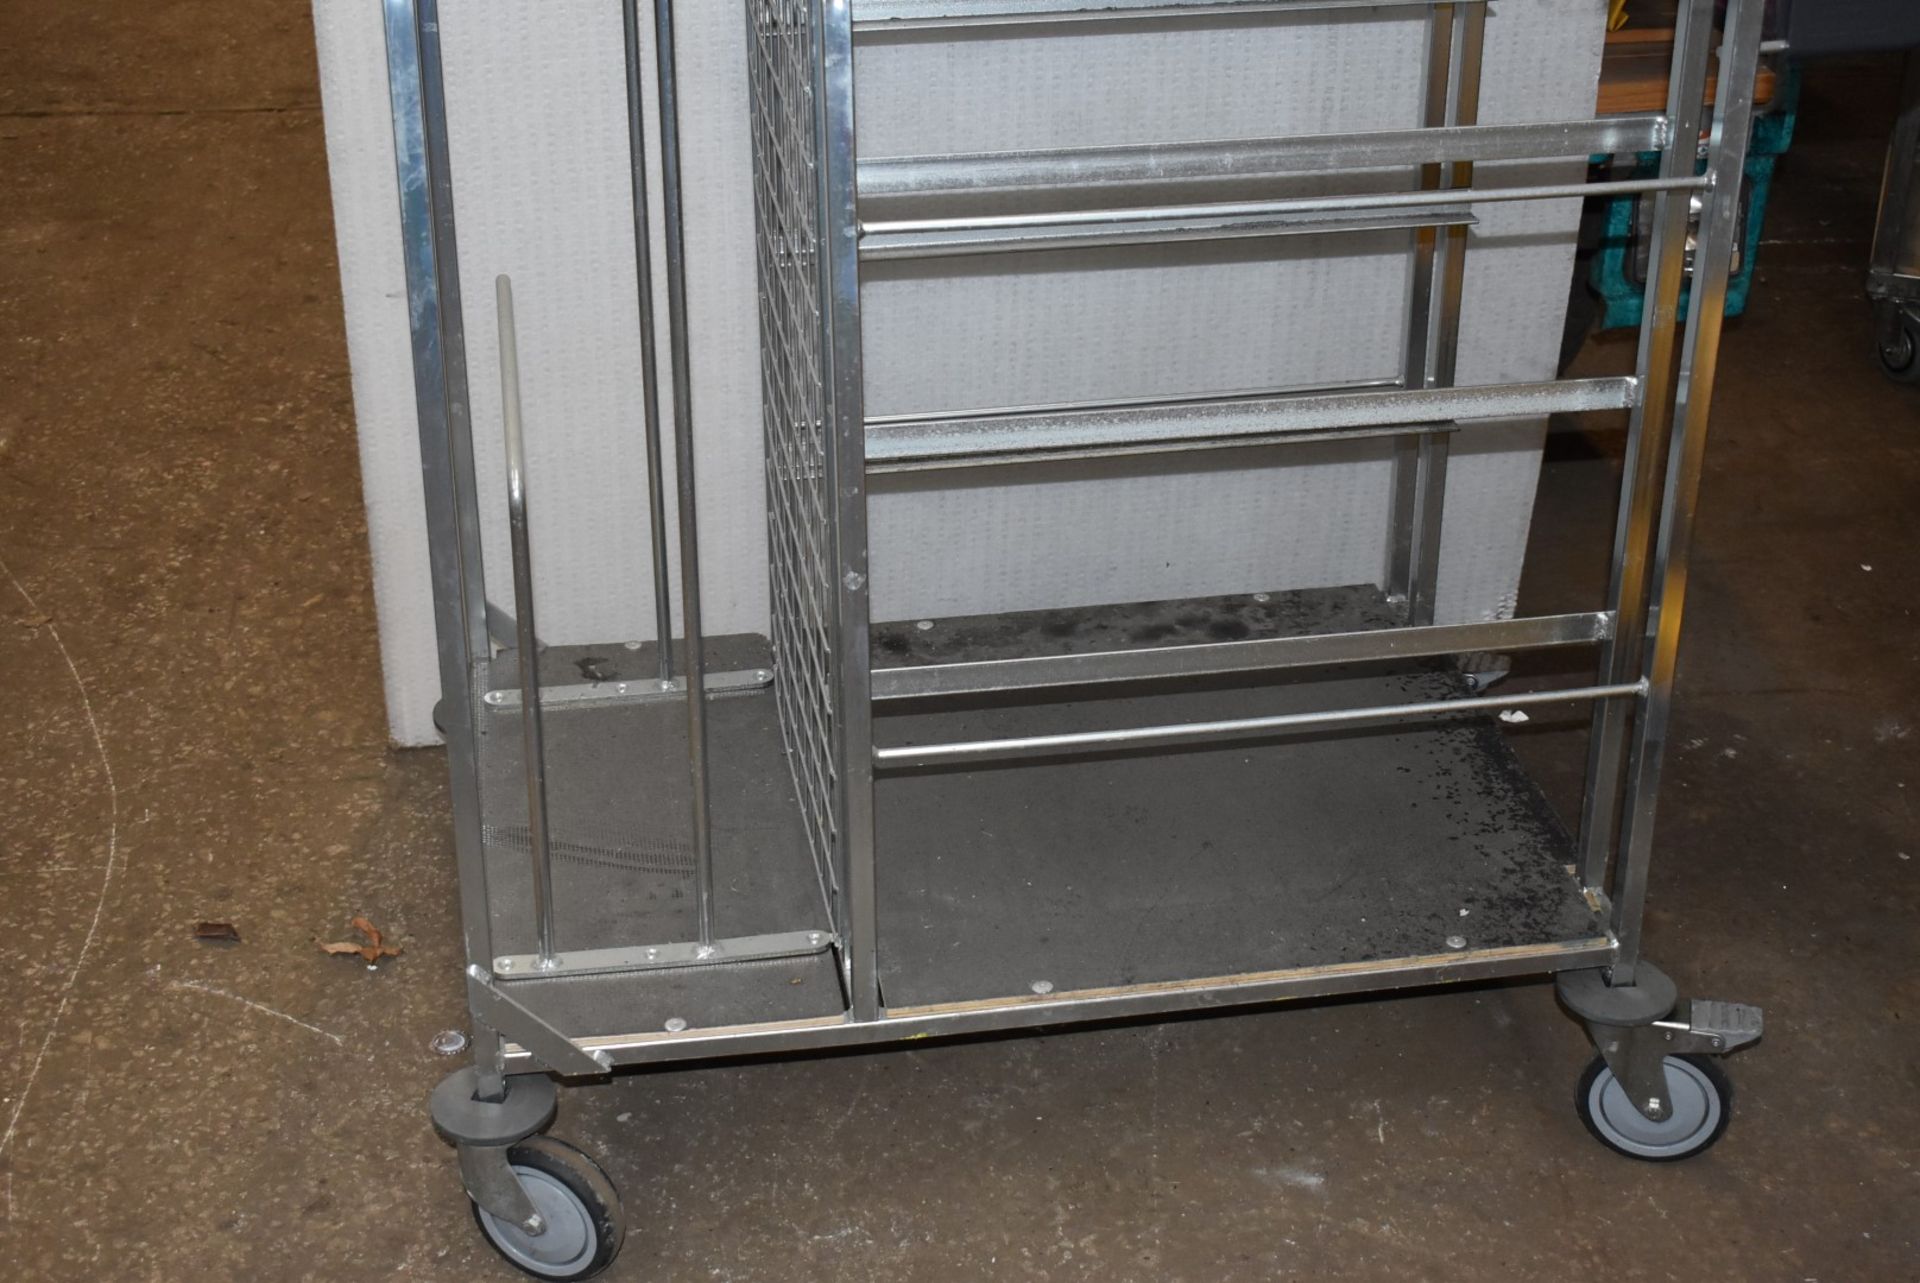 1 x Mobile Picker / Packer Trolly - Overall Size H105 x W100 x D60 cms - CL011 - Ref GC512 WH5 - - Image 4 of 5